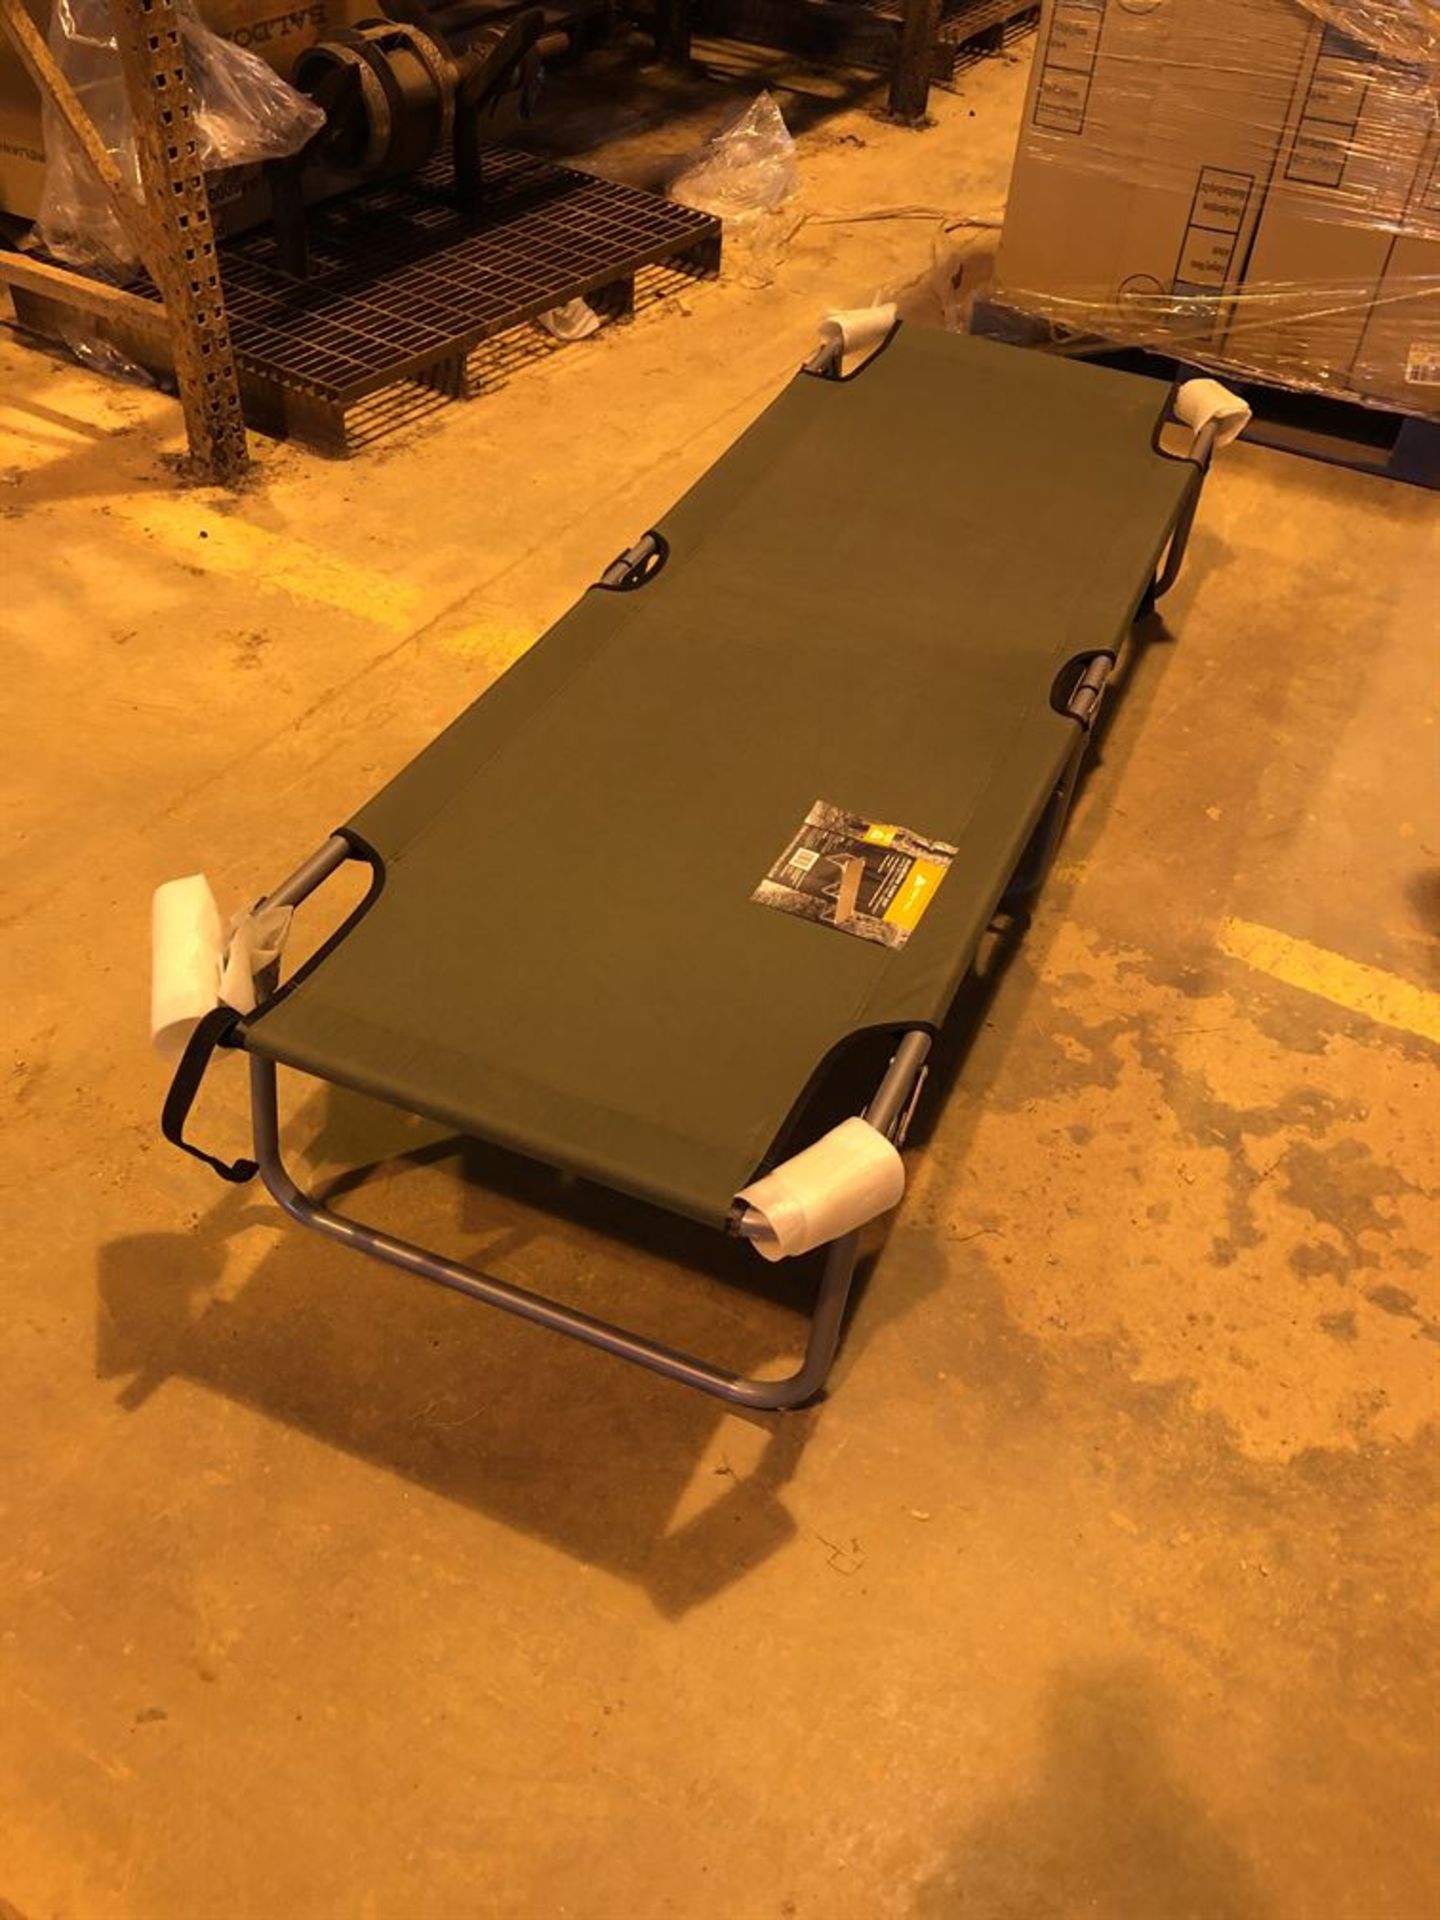 Lot Comprised of (20) OZARK TRAIL Aluminum Camping Cots (Location: Motor Warehouse)